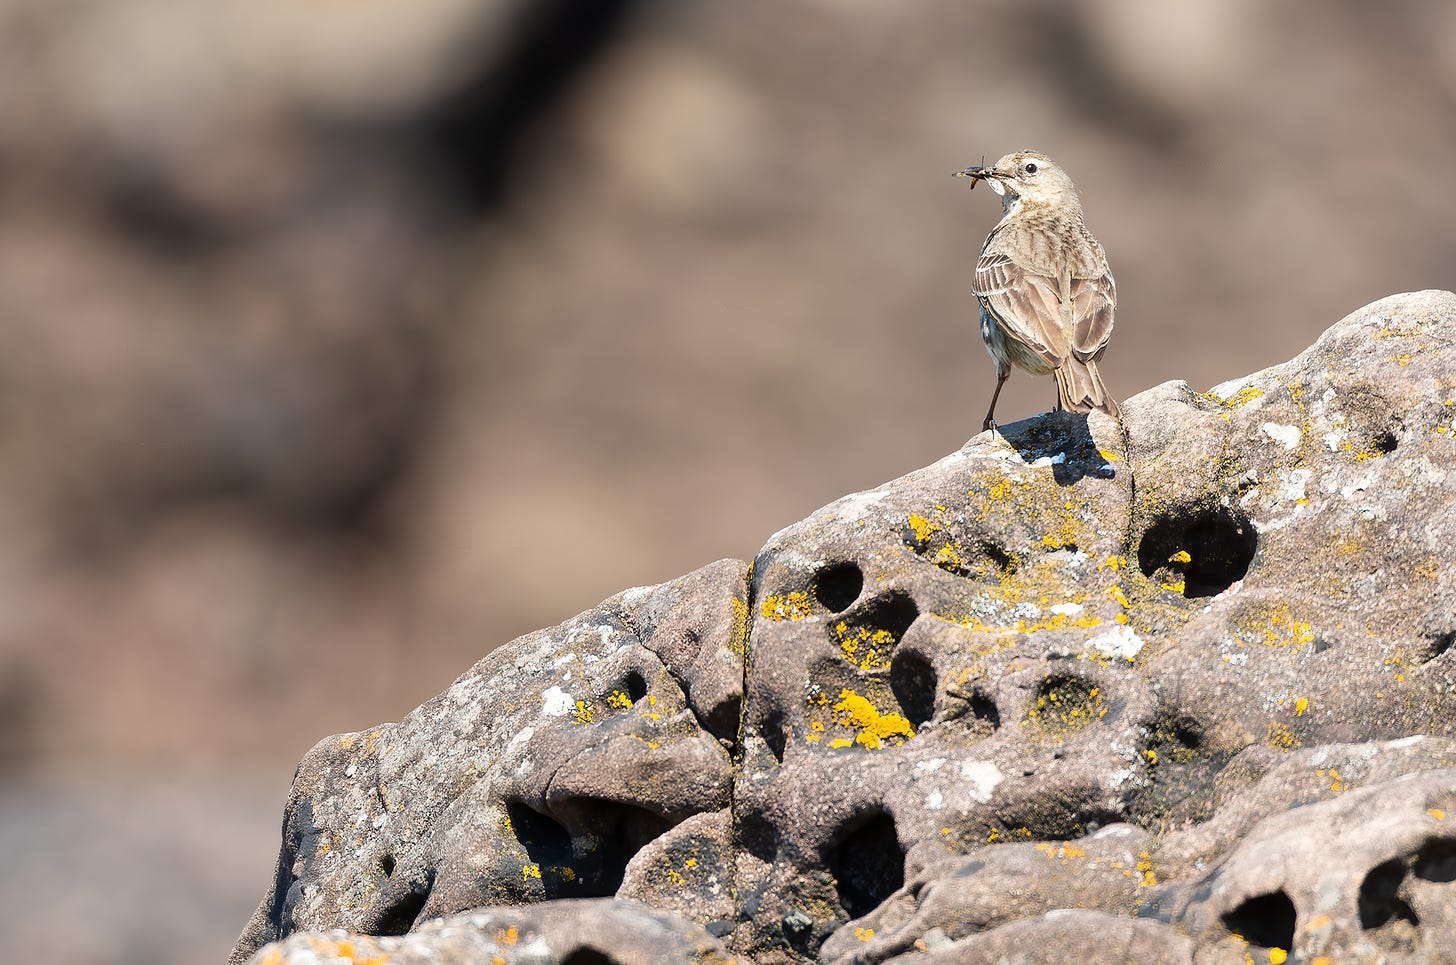 Rock pipit perched on a rock with invertebrates in its beak, photographed by Rhiannon Law